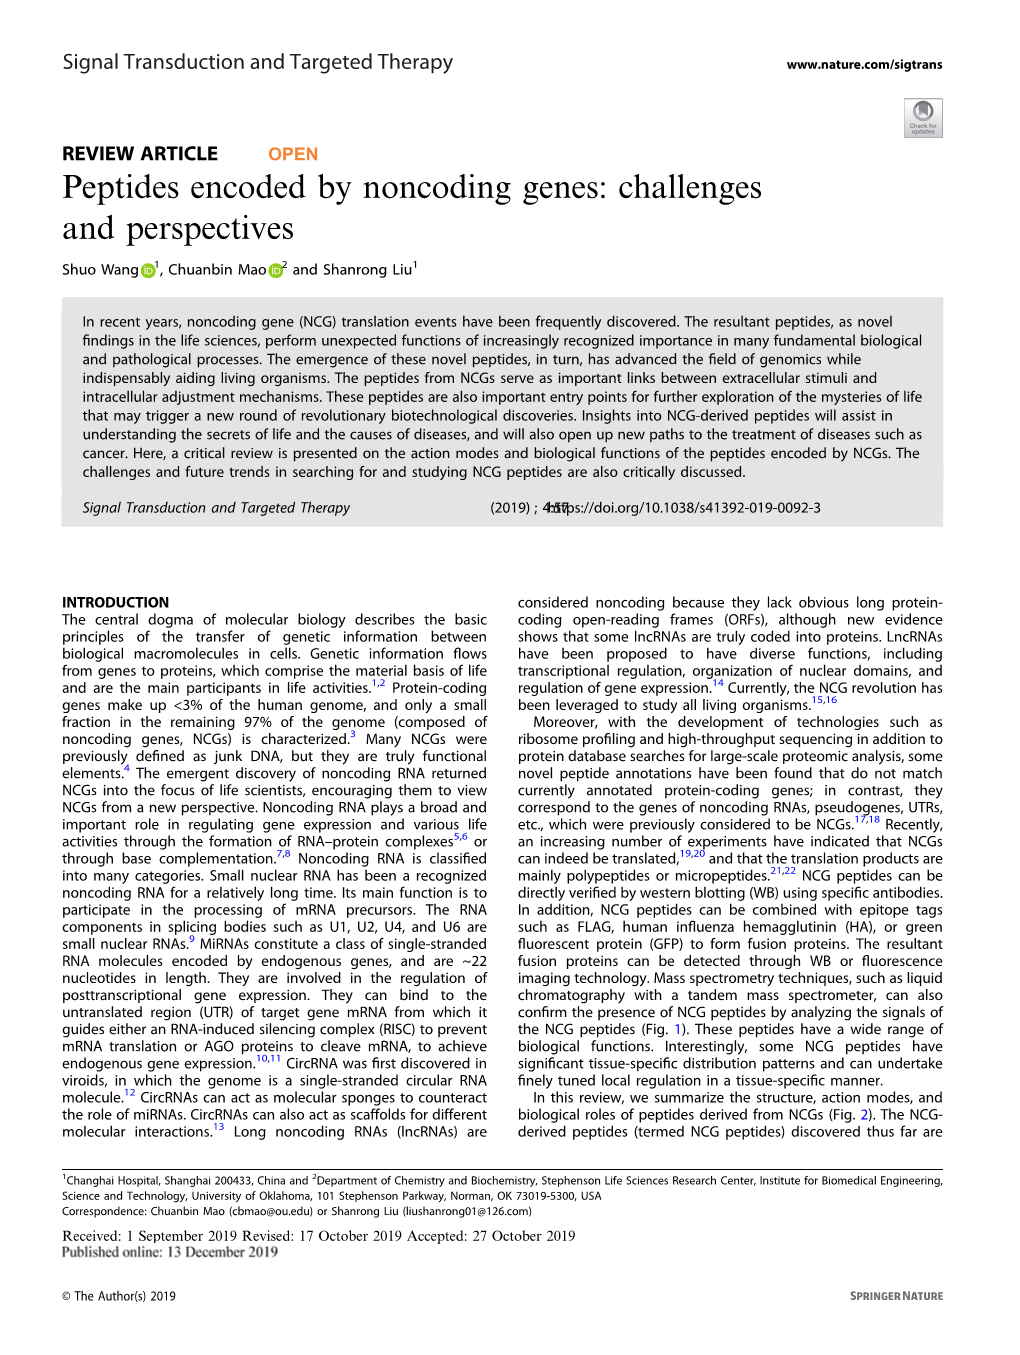 Peptides Encoded by Noncoding Genes: Challenges and Perspectives